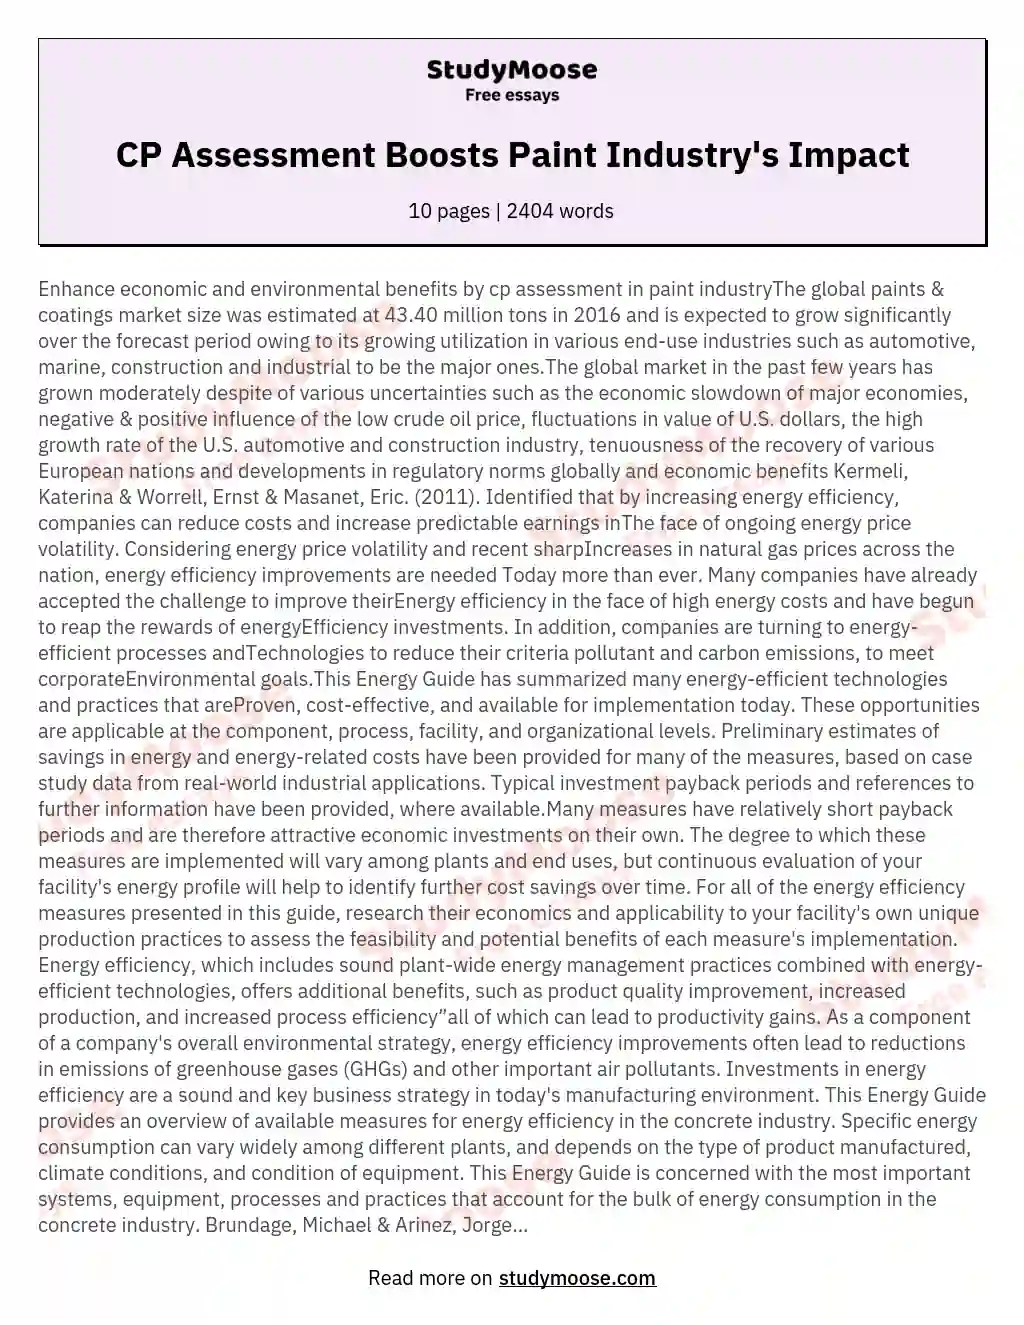 CP Assessment Boosts Paint Industry's Impact essay